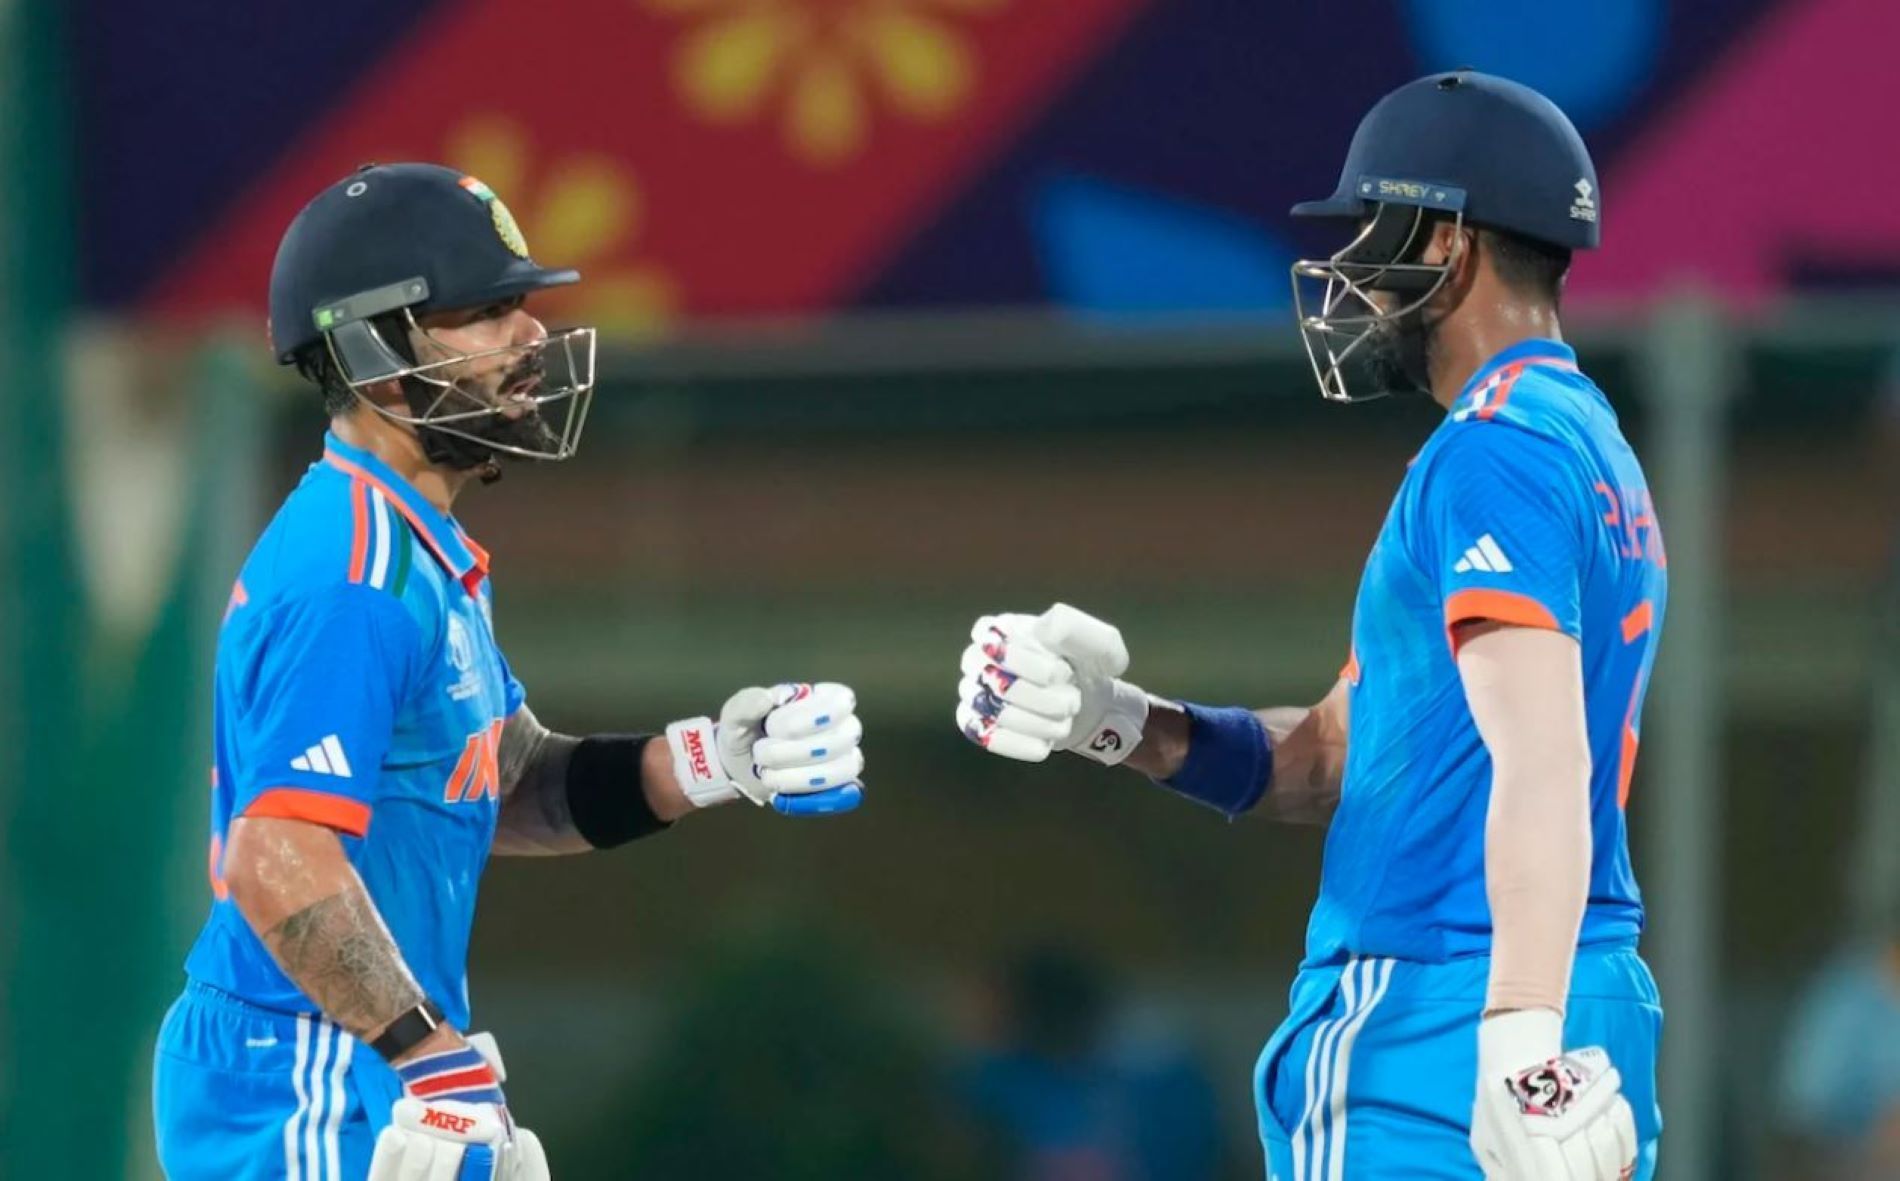 Virat Kohli and KL Rahul bailed India out of early trouble in their run-chase.